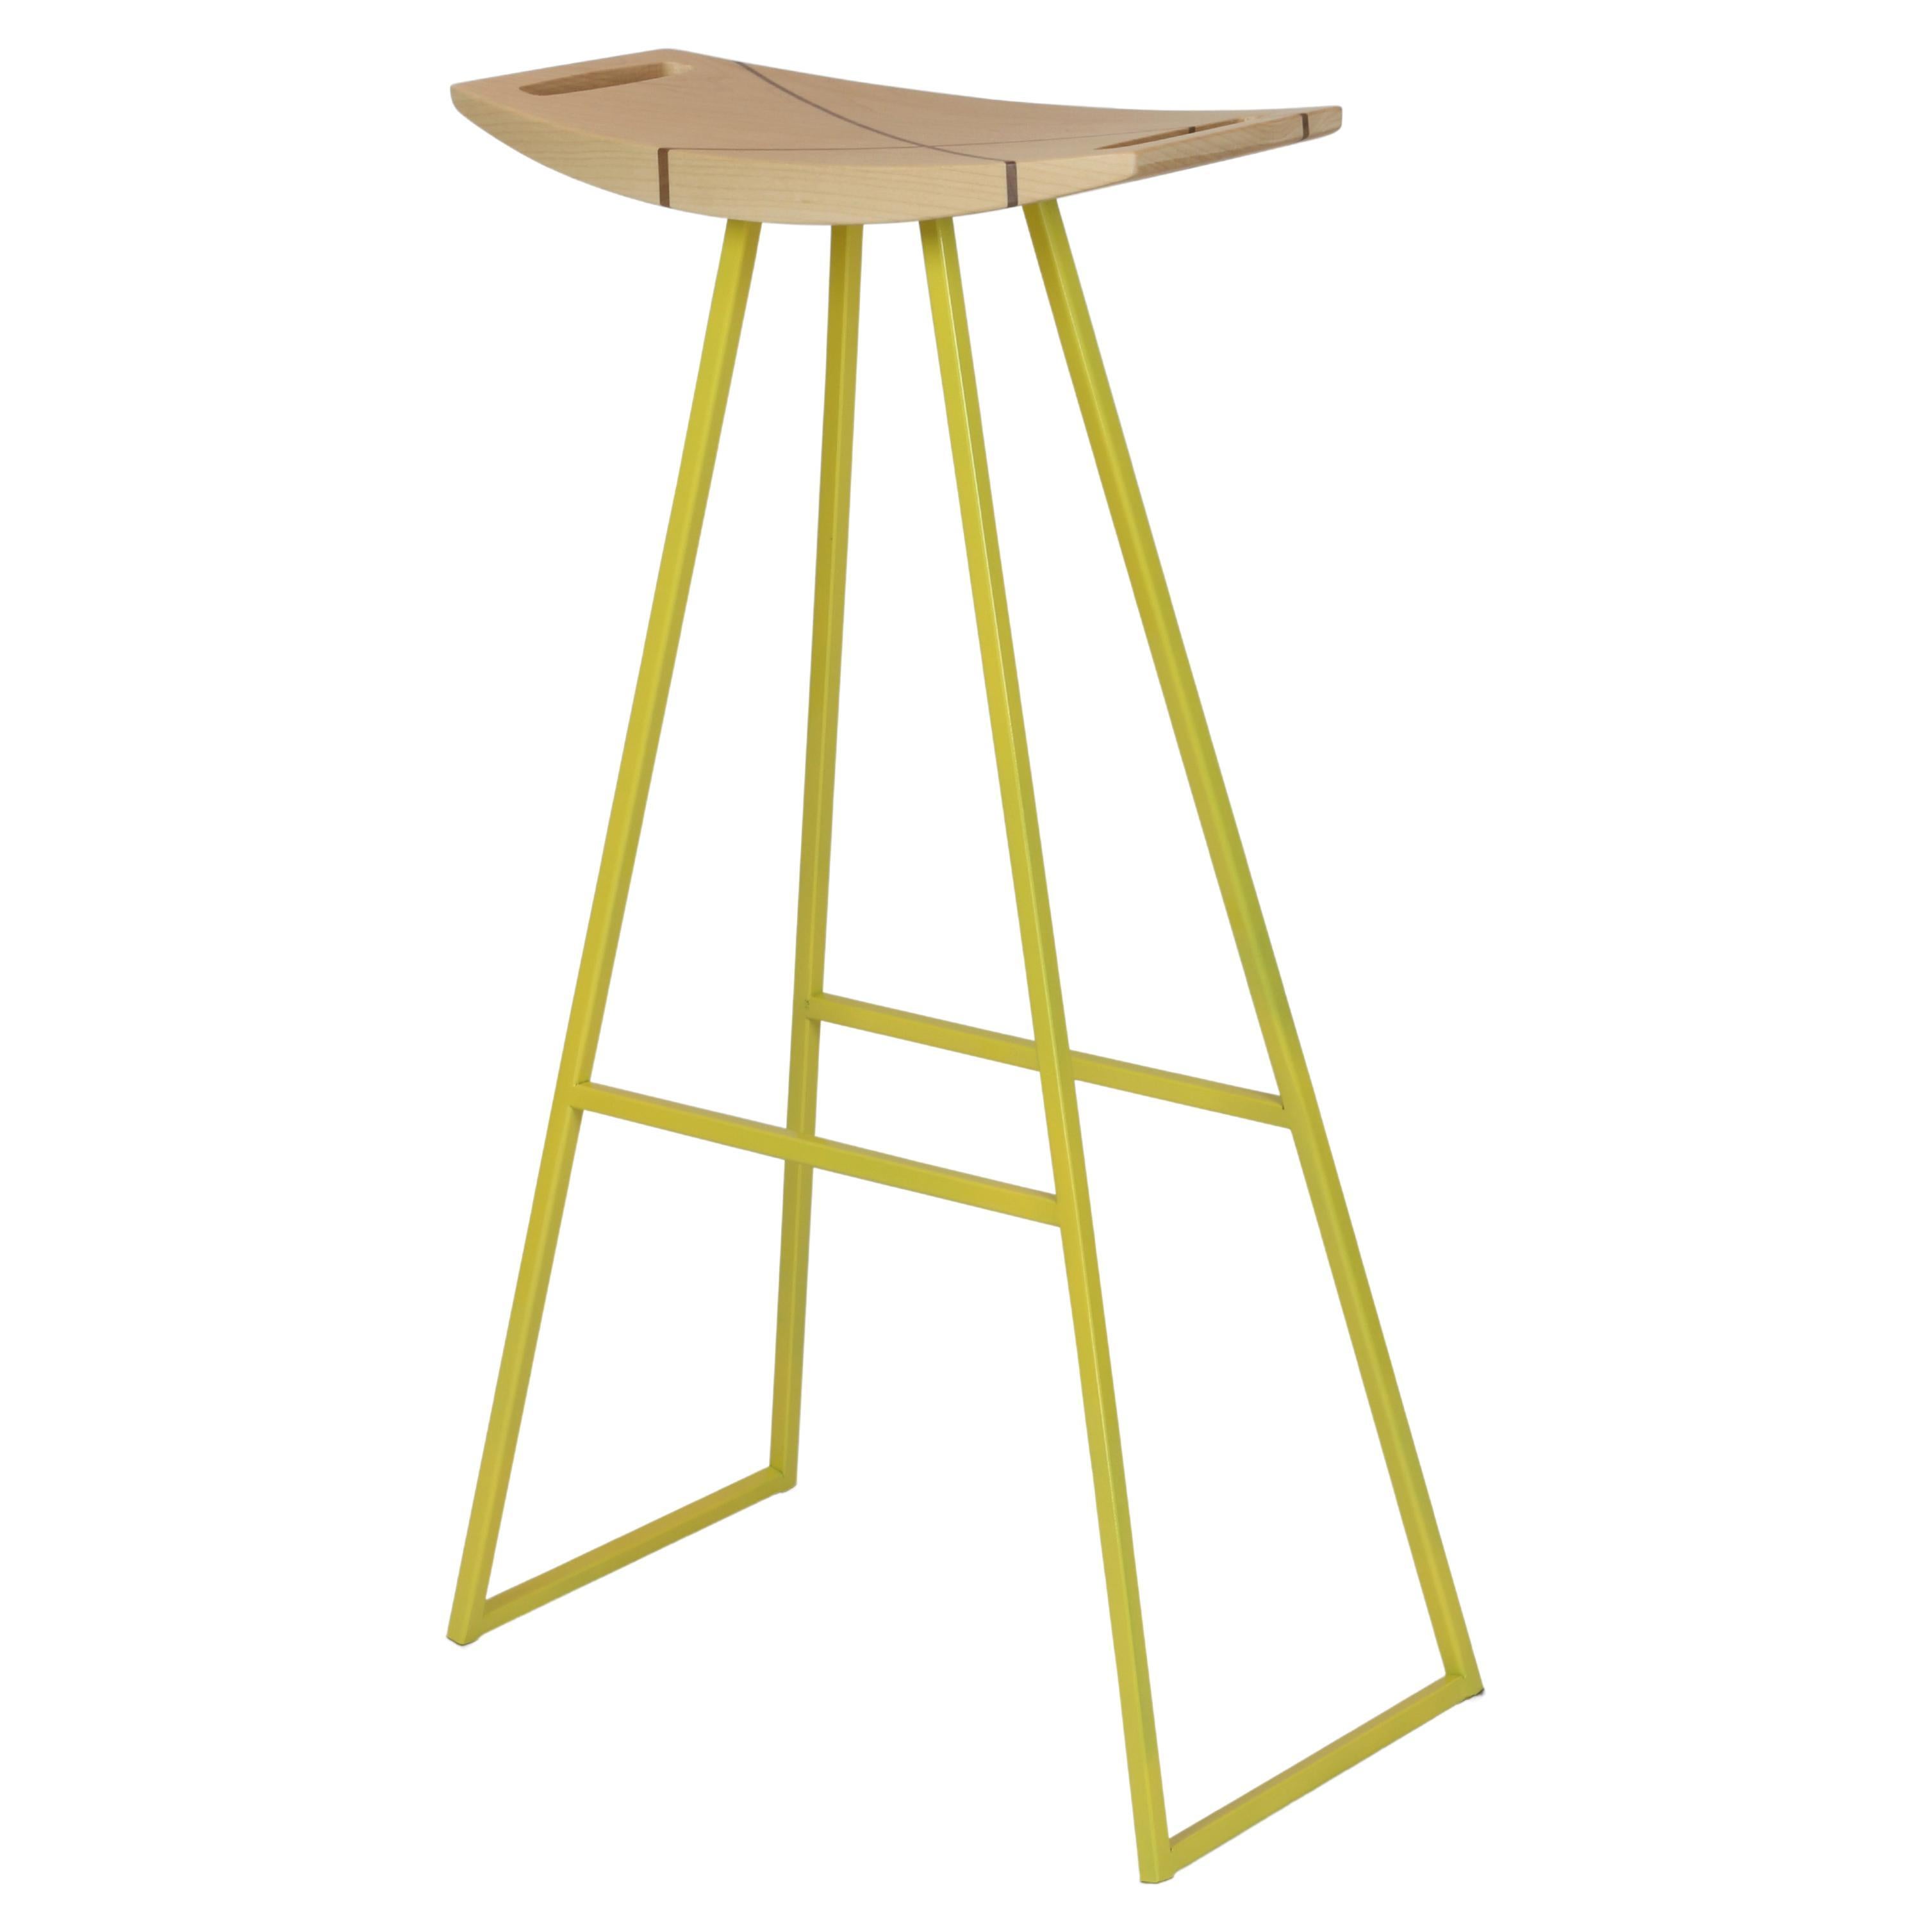 Roberts Bar Stool with Wood Inlay Maple Yellow